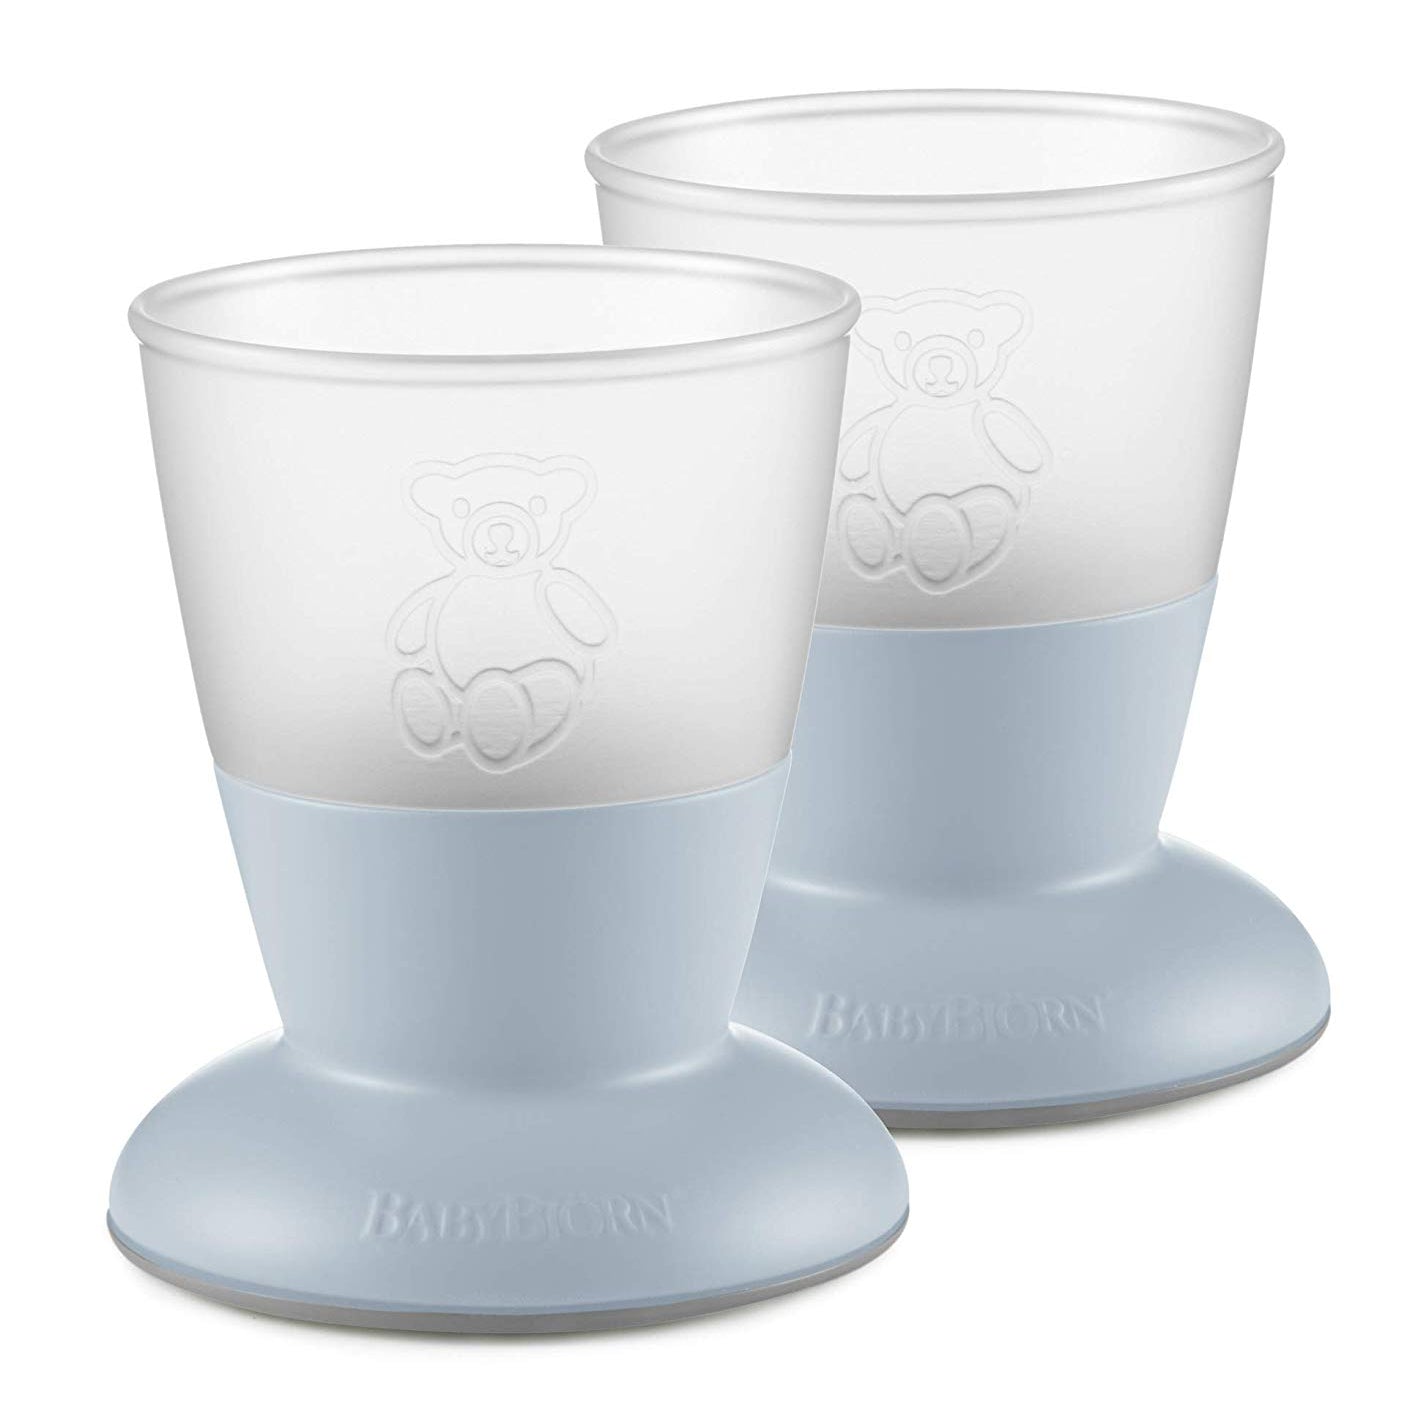 Baby Cup - 2 Pack powder blue